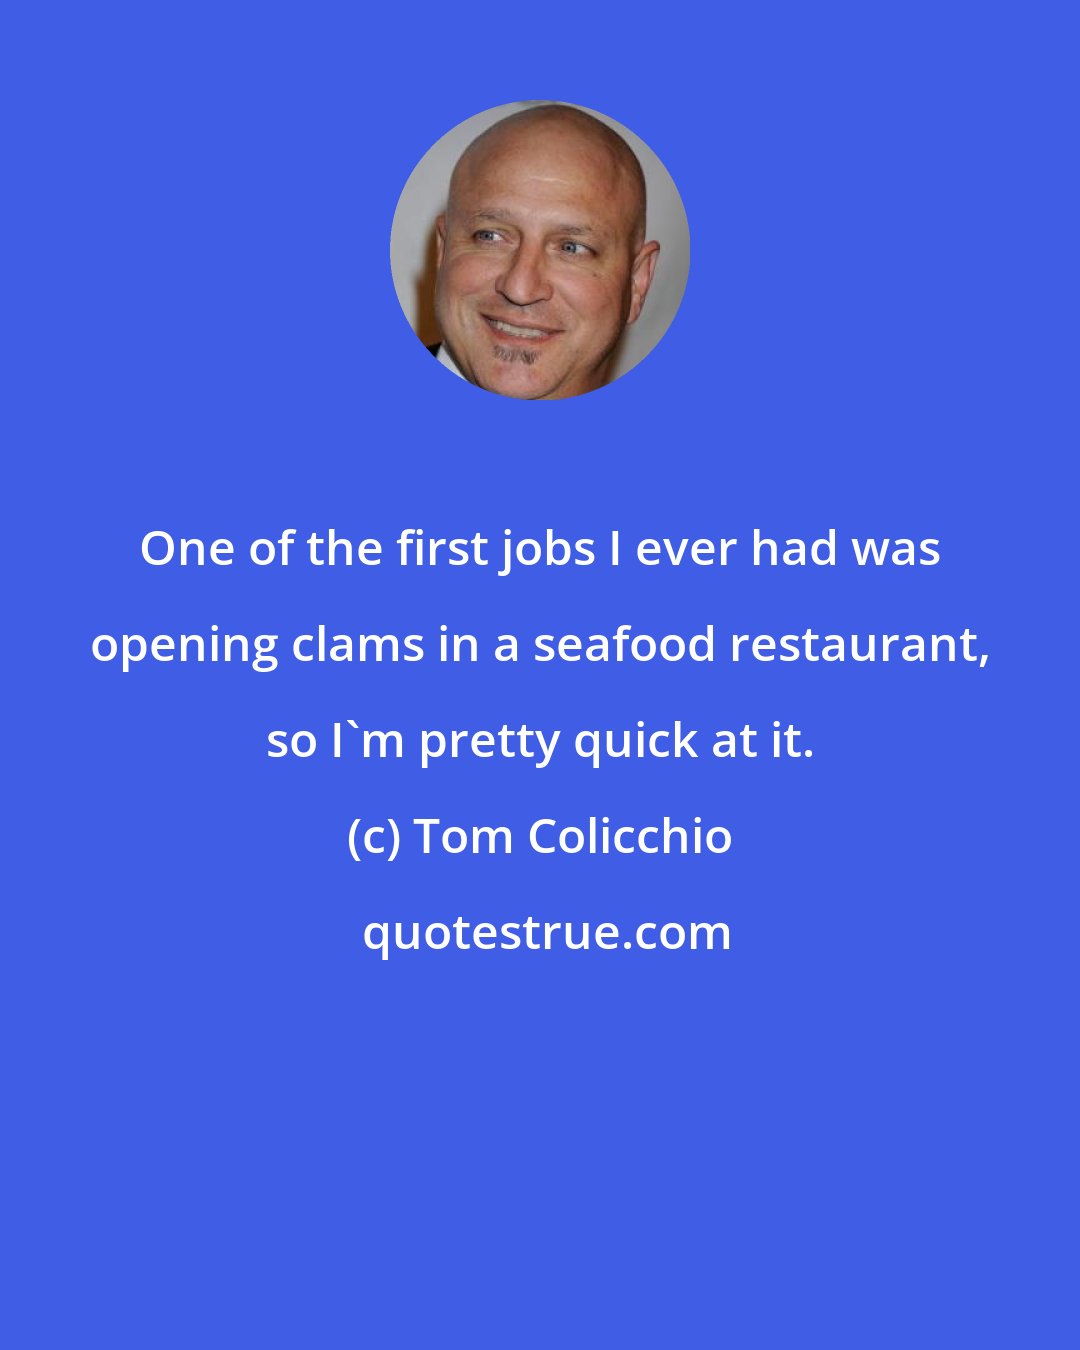 Tom Colicchio: One of the first jobs I ever had was opening clams in a seafood restaurant, so I'm pretty quick at it.